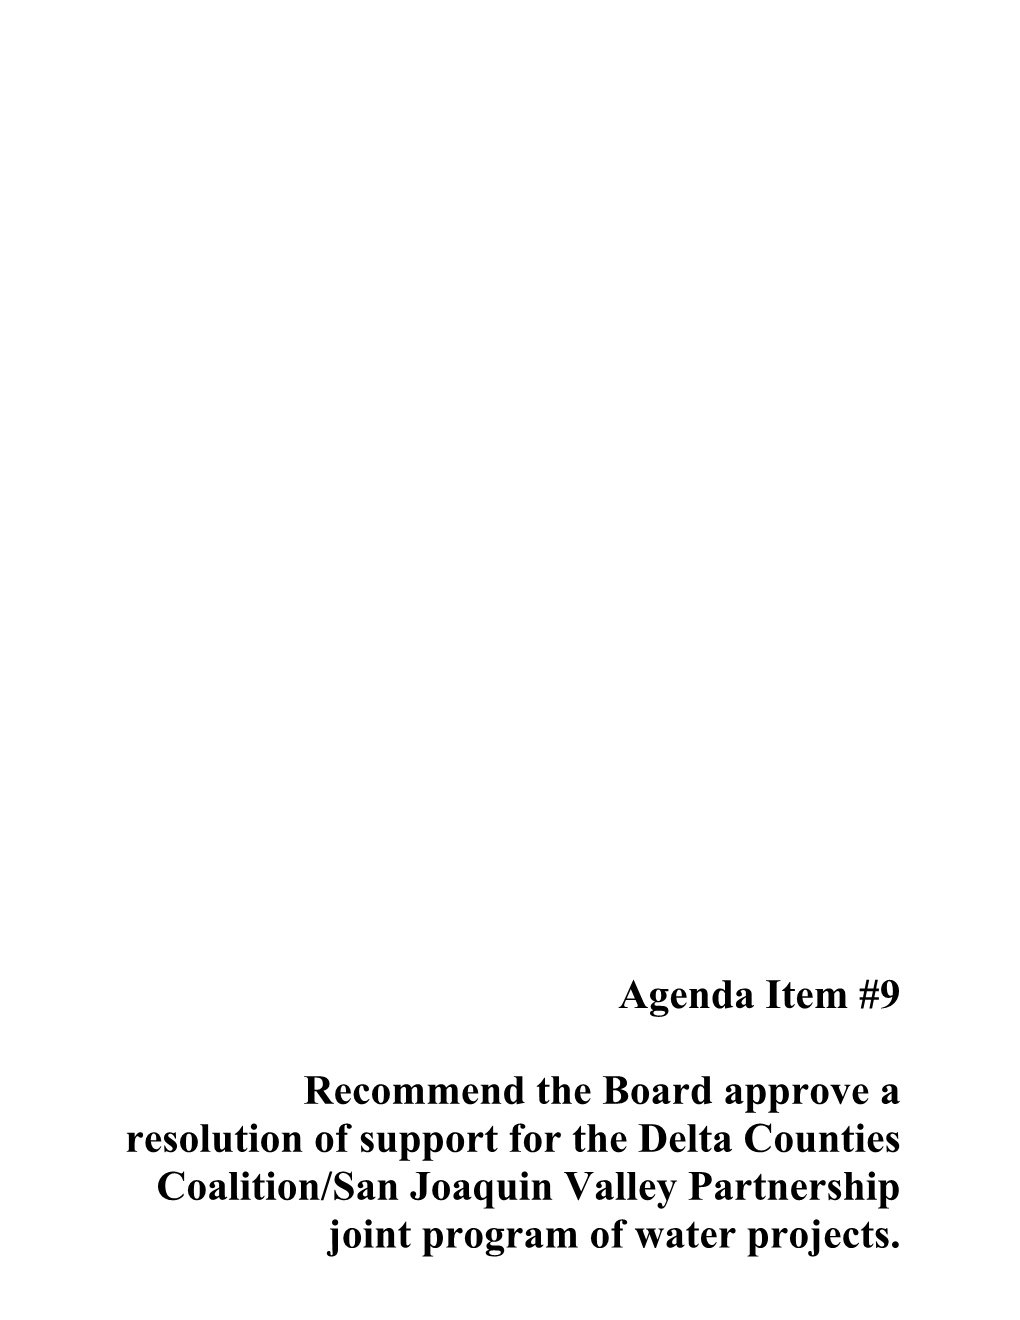 Agenda Item #9 Recommend the Board Approve a Resolution Of